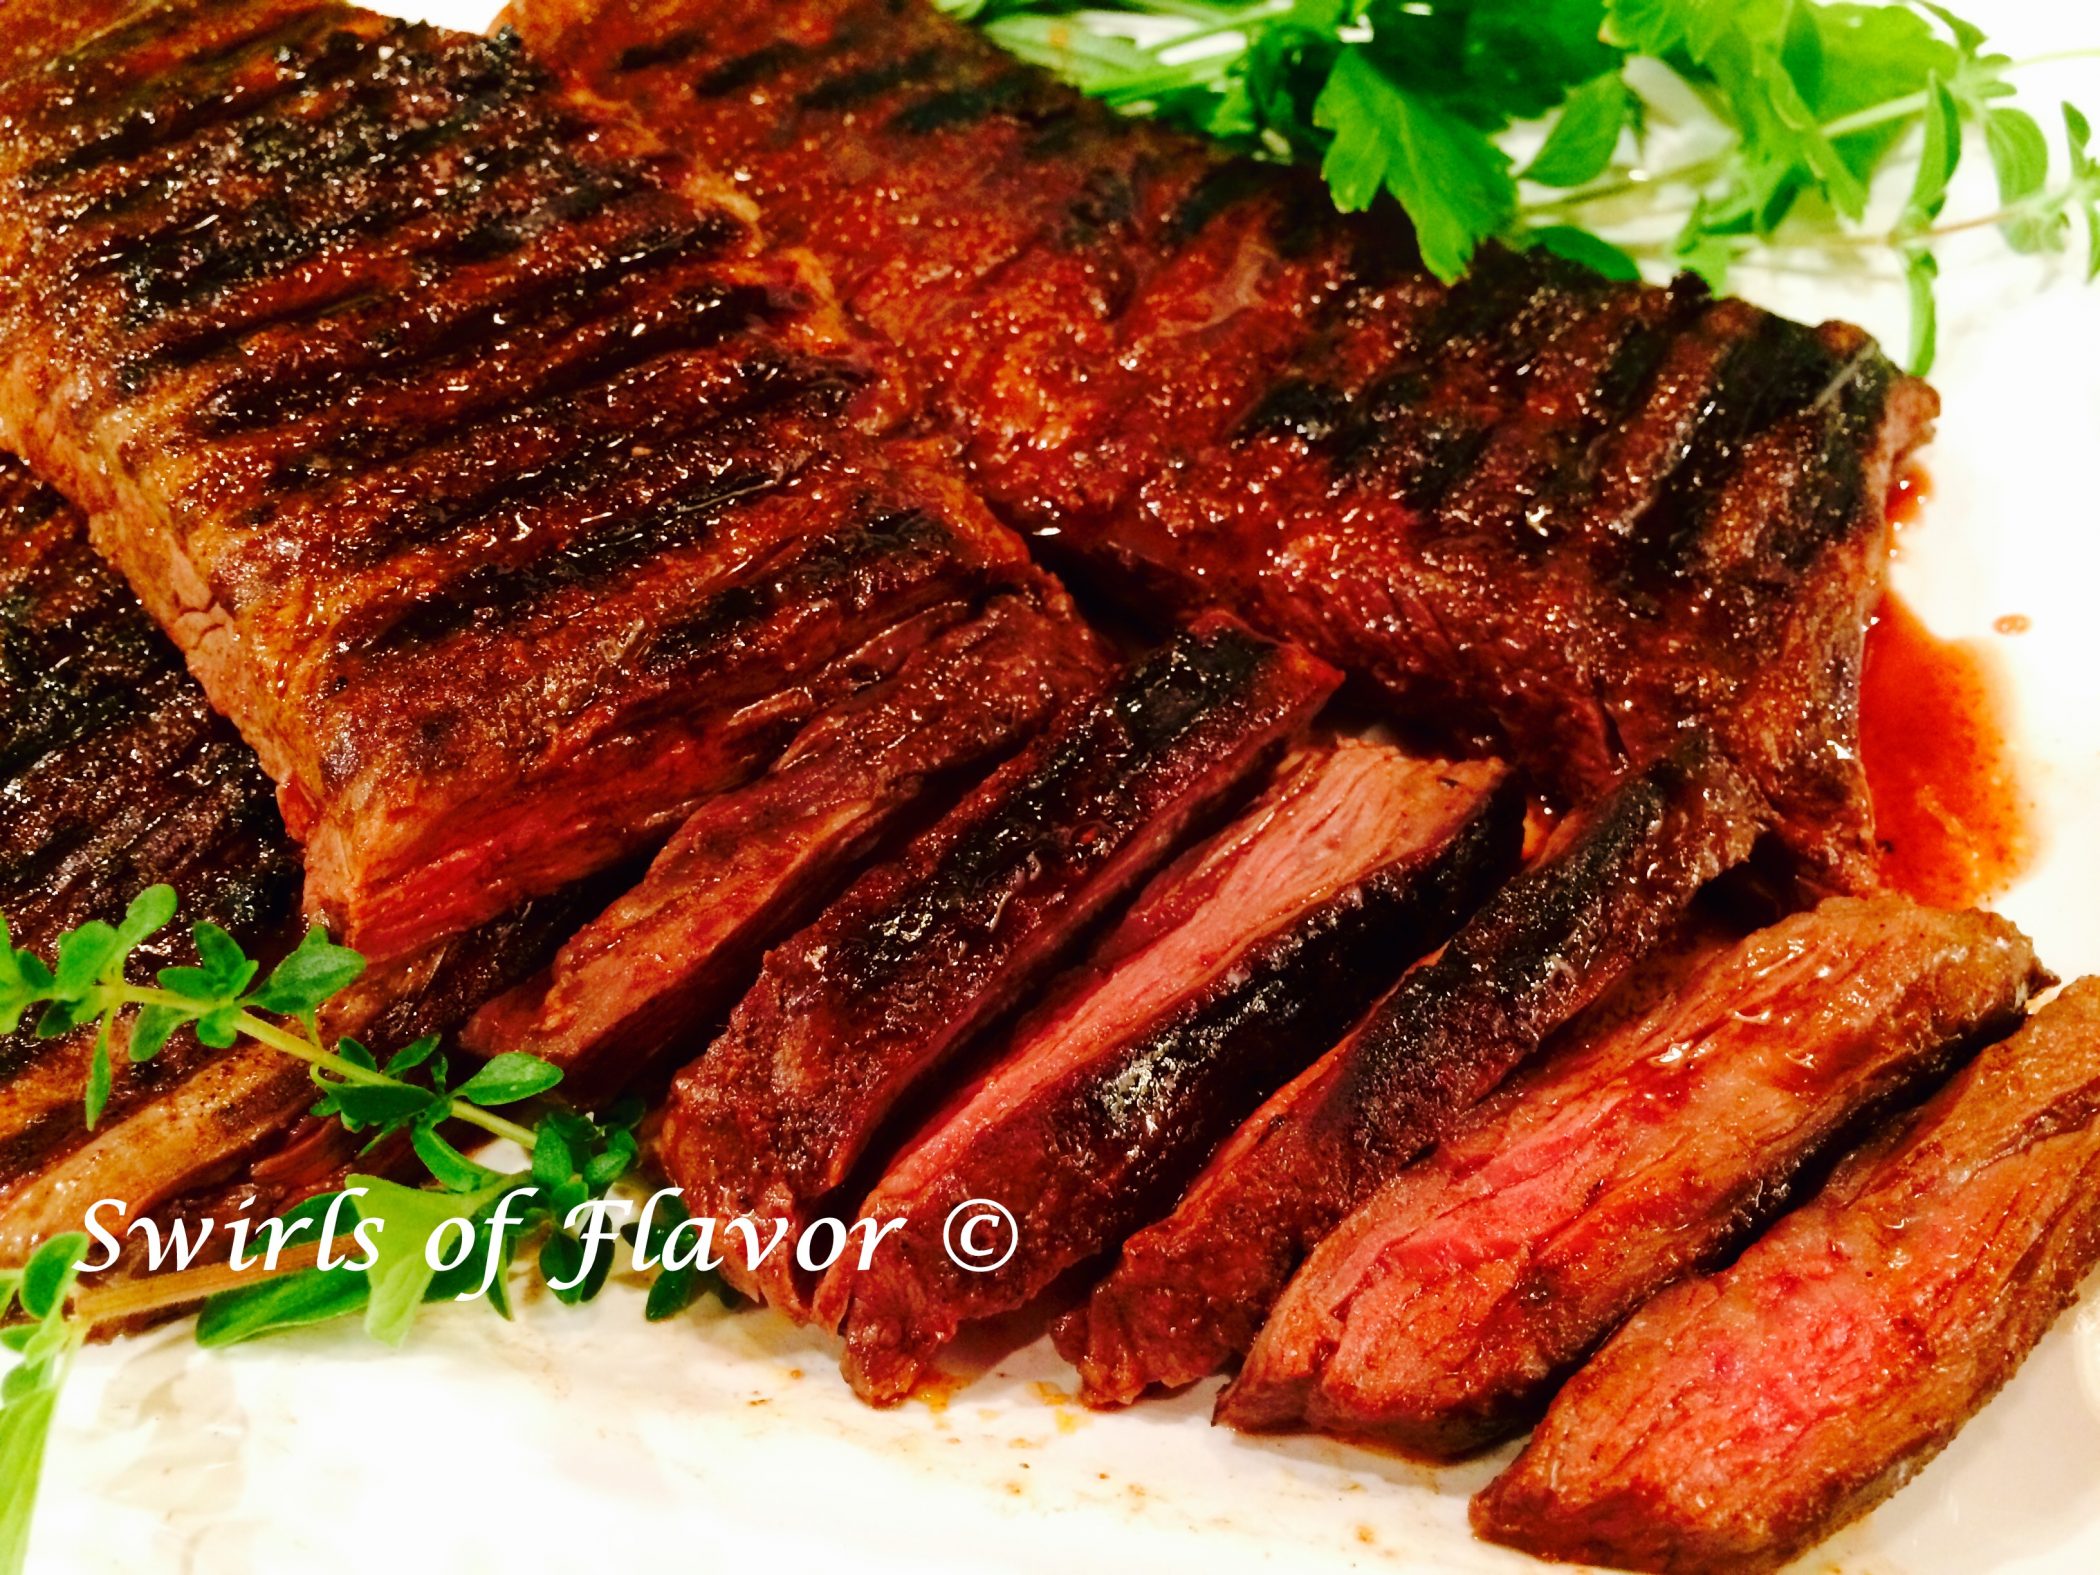 Skirt steak recipe with slices and fresh herbs